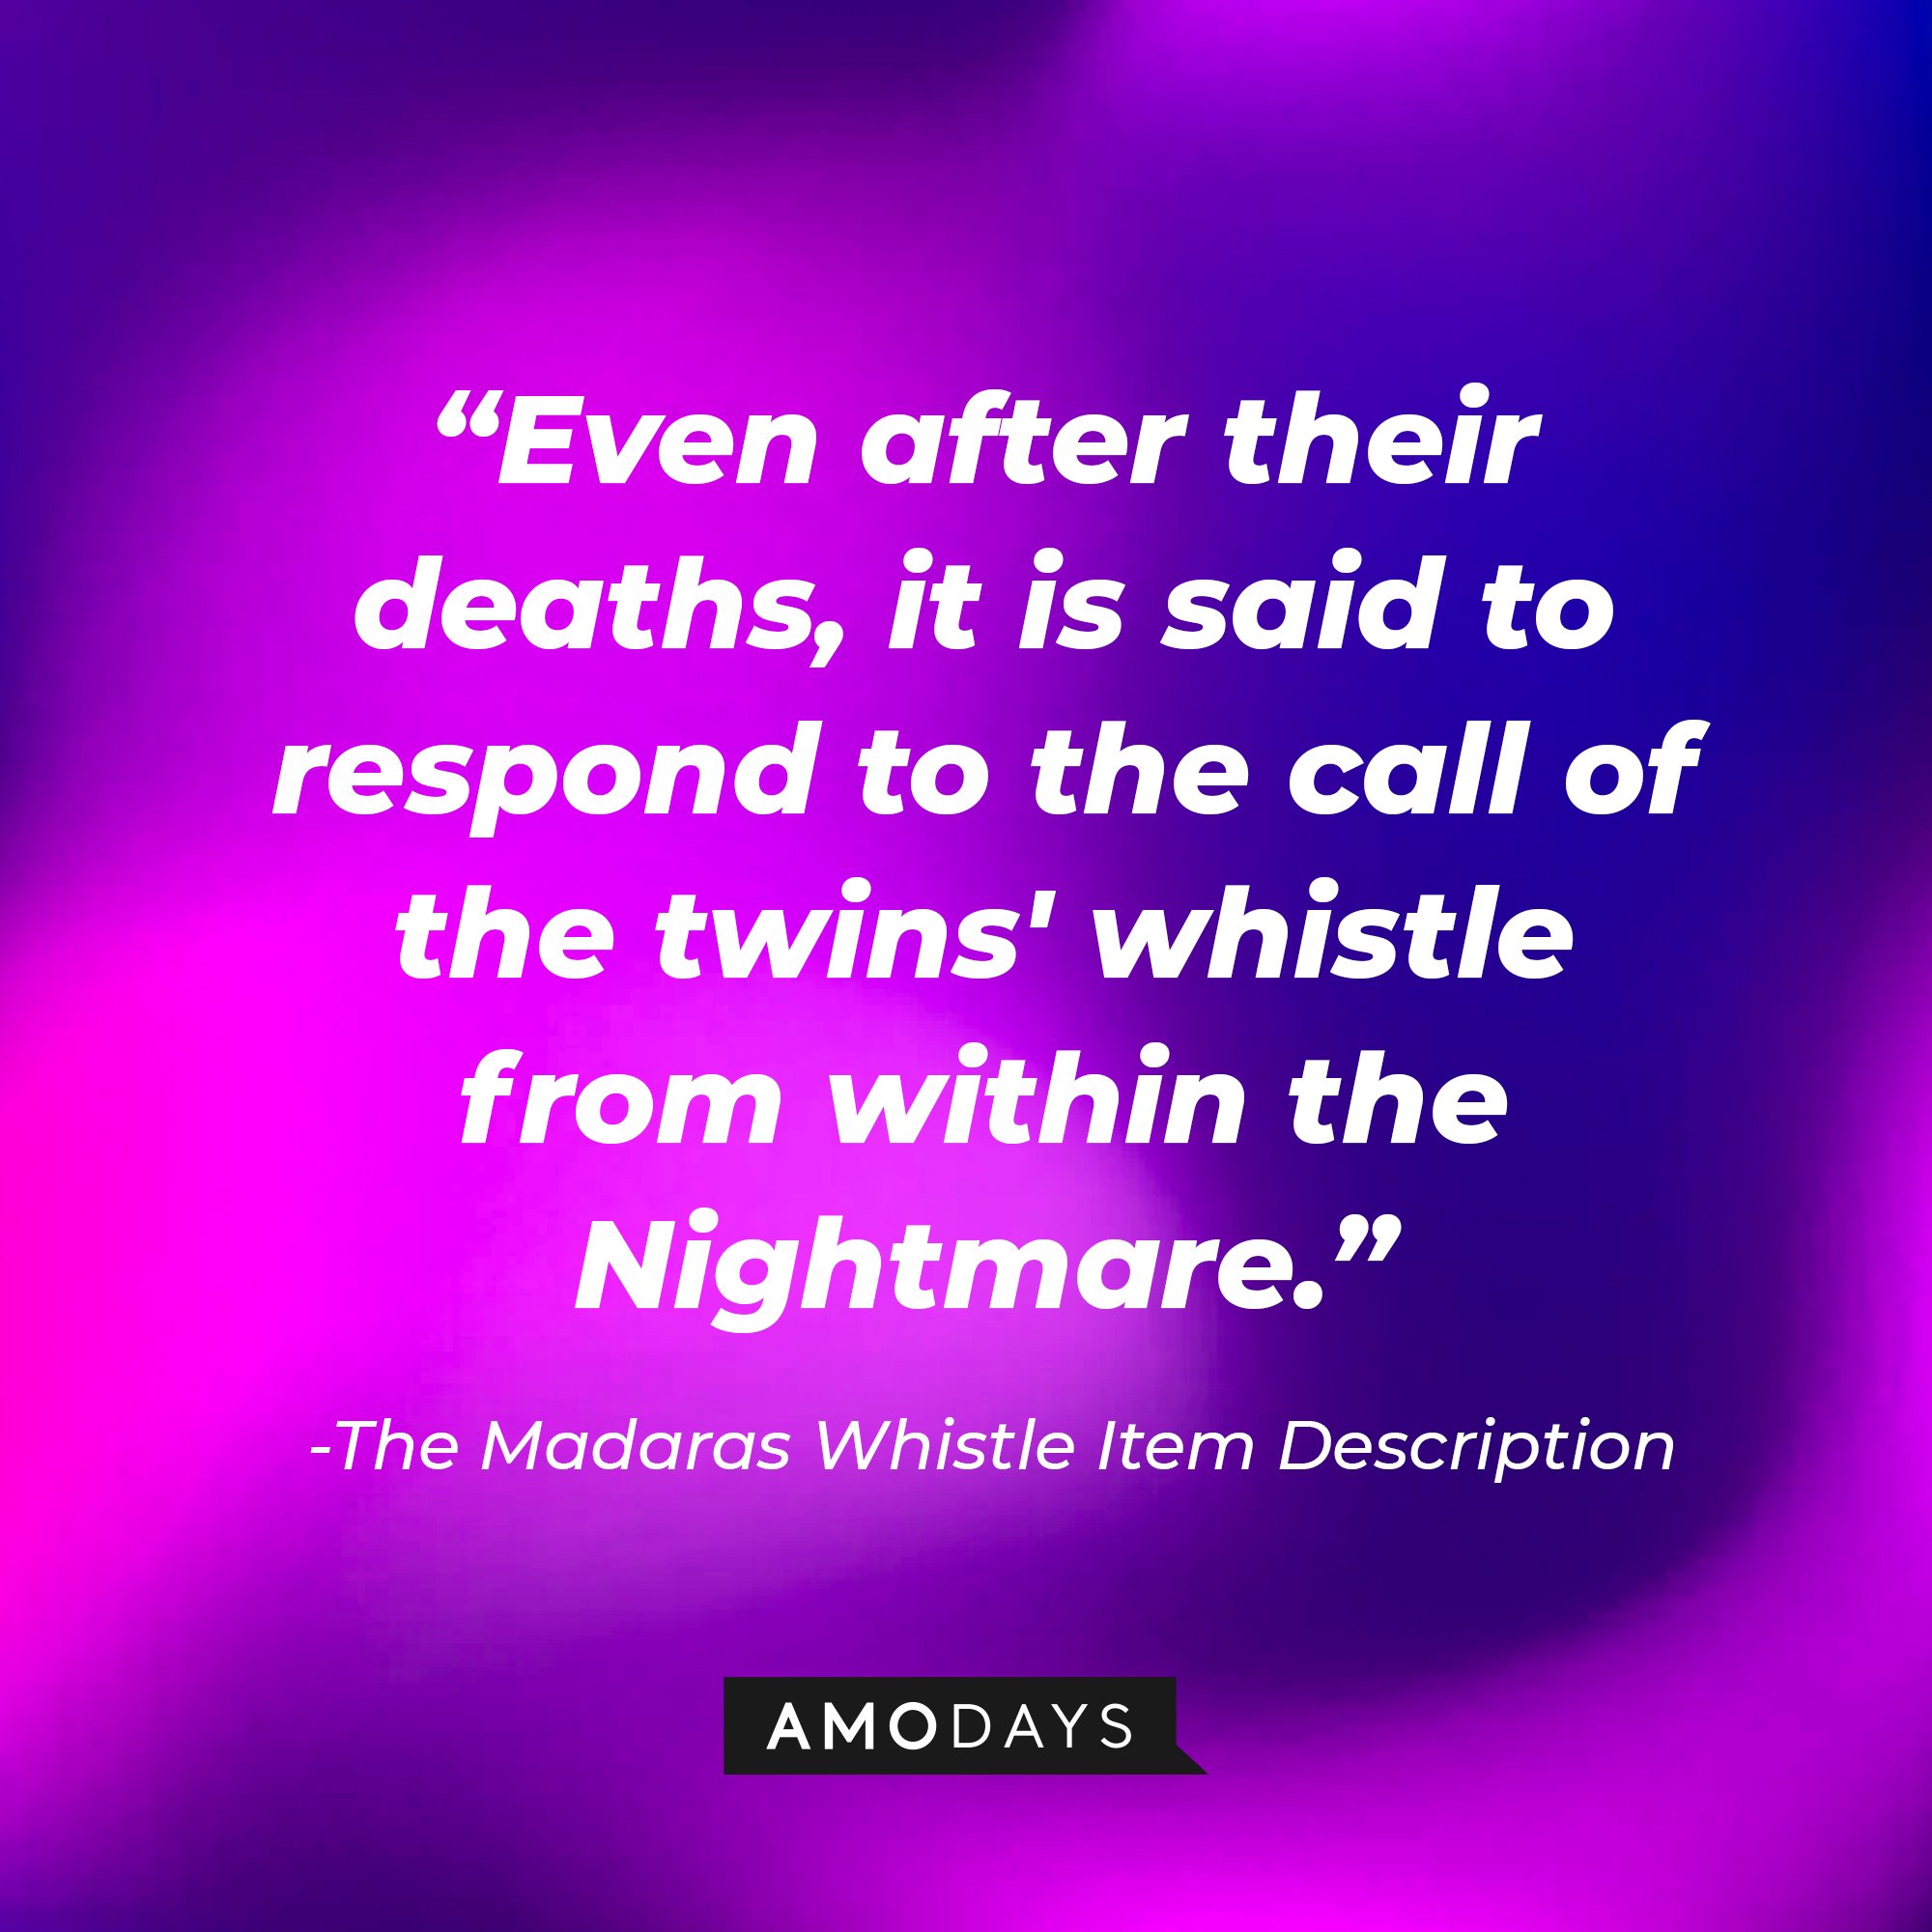 The Madaras Whistle Item Description: "Even after their deaths, it is said to respond to the call of the twins' whistle from within the Nightmare." | Image: AmoDays